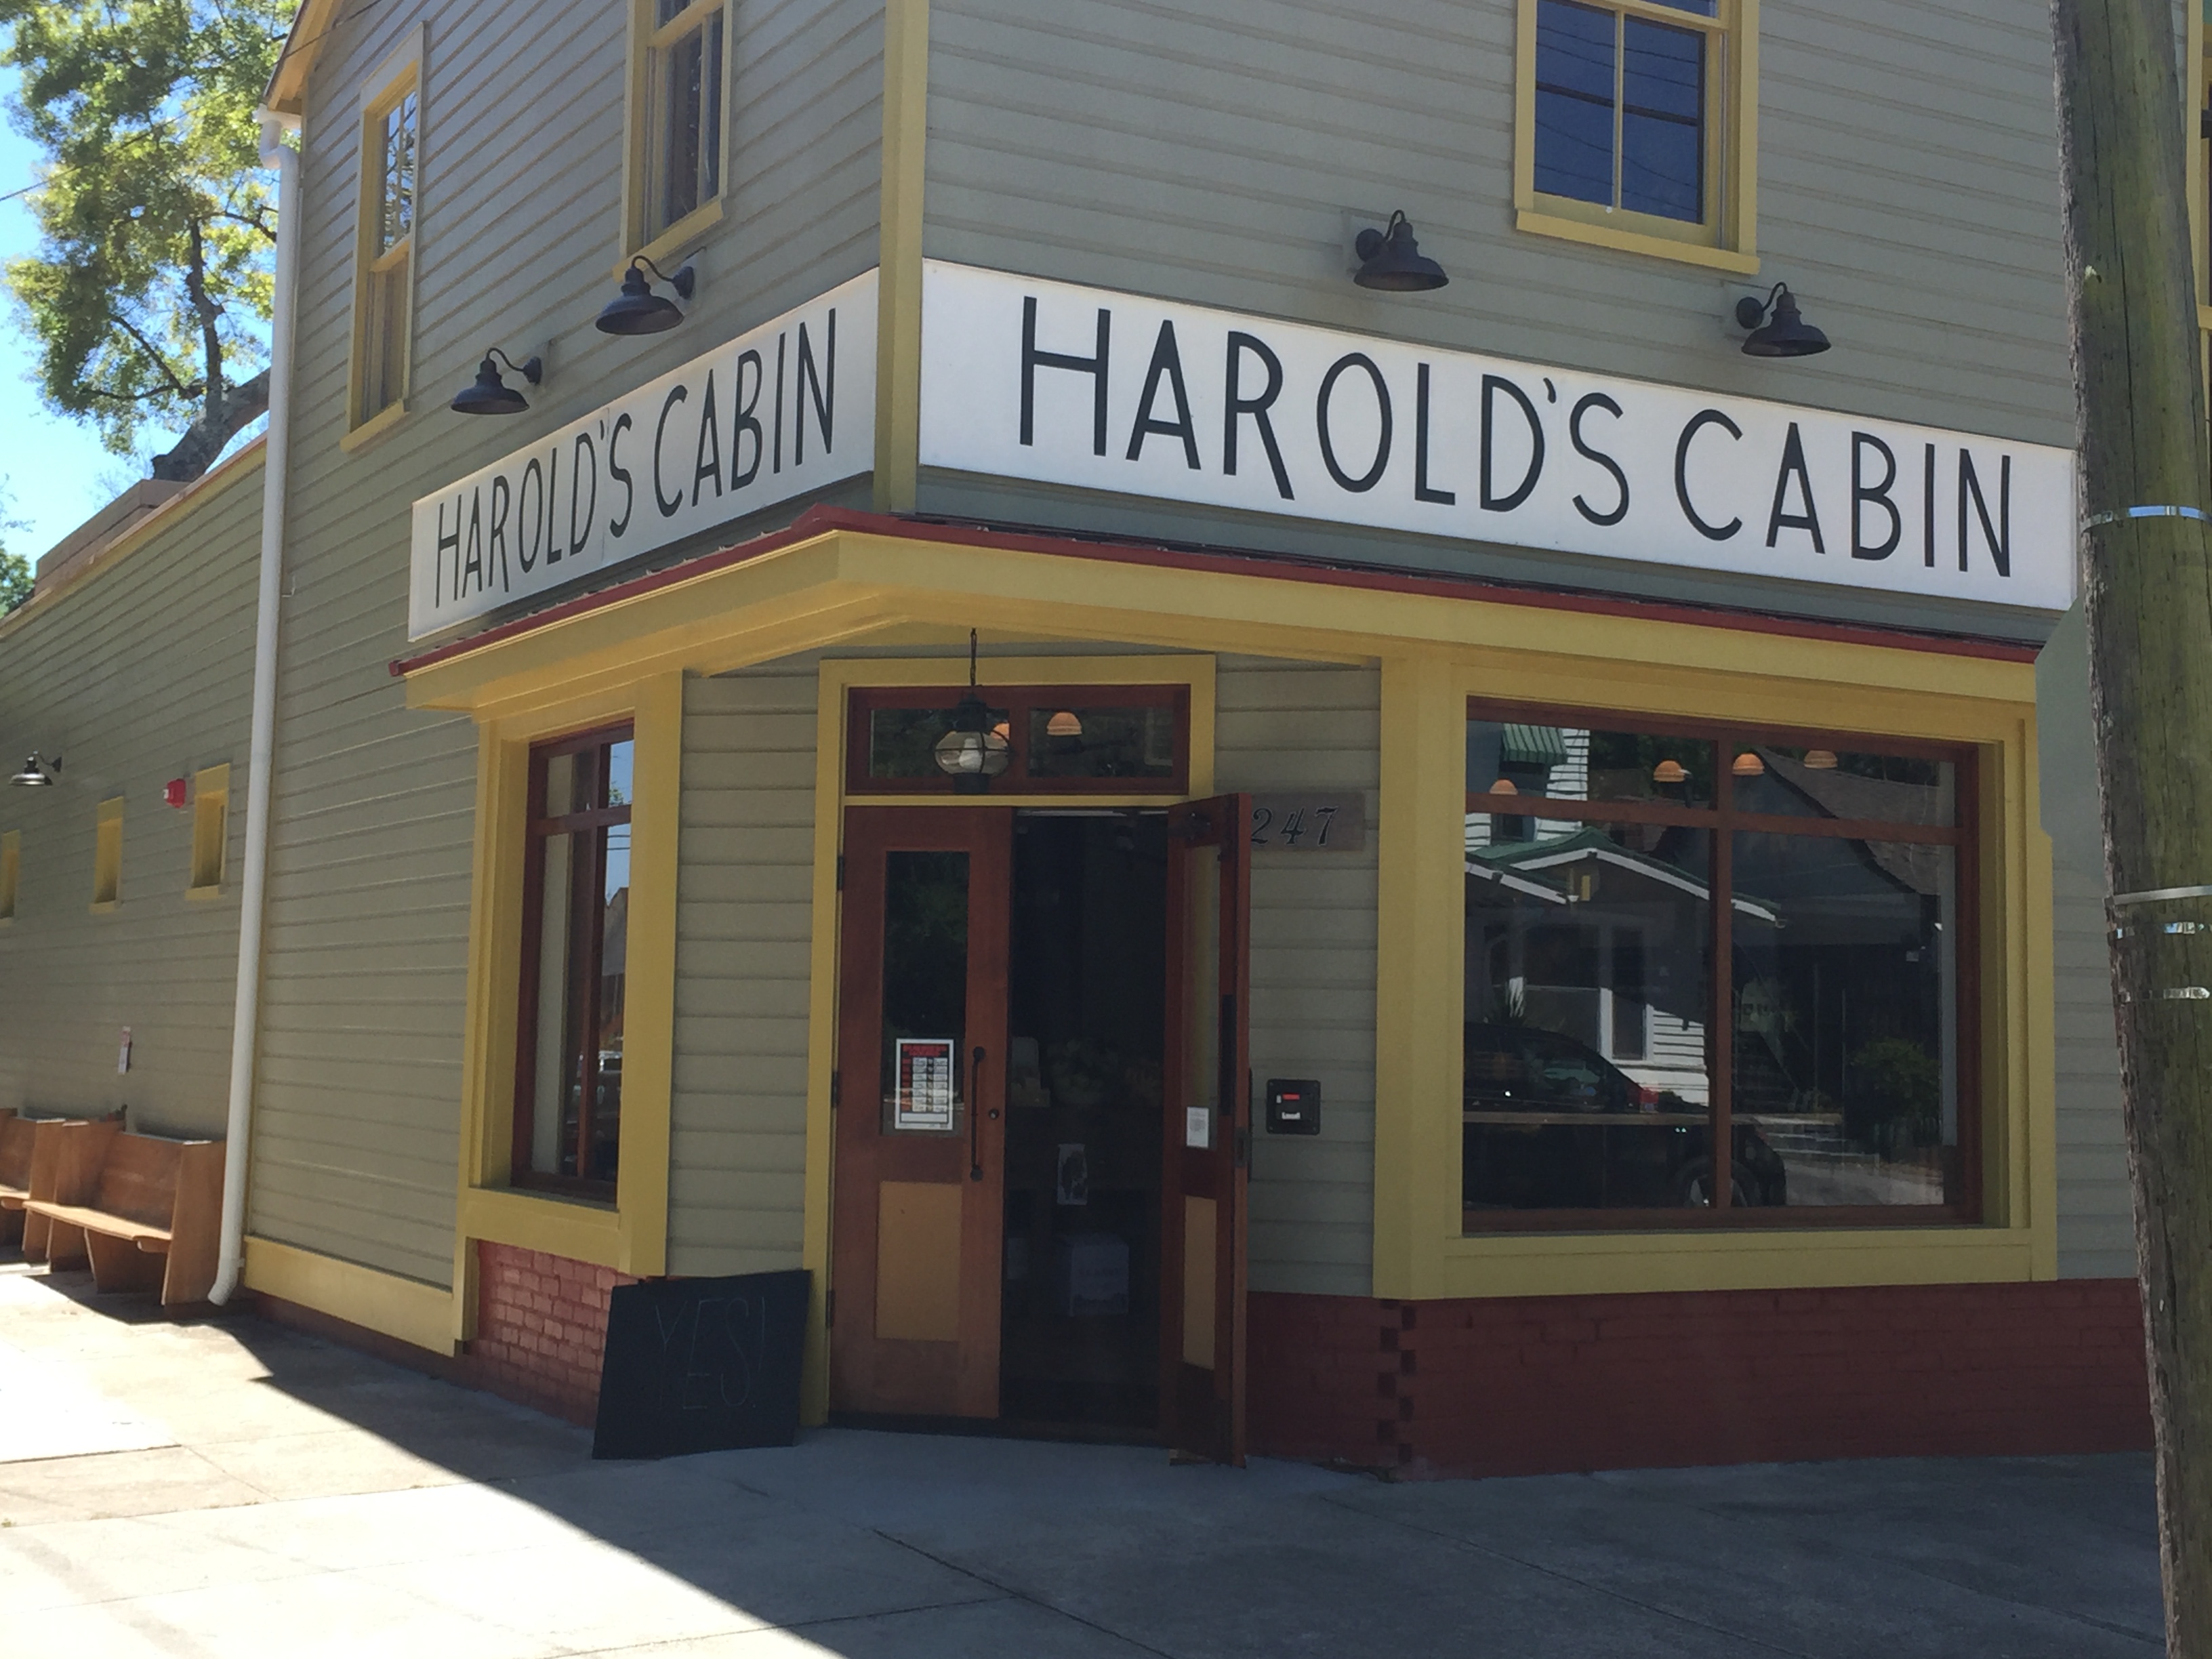 An exterior of a corner building with a sign that says Harold’s Cabin.